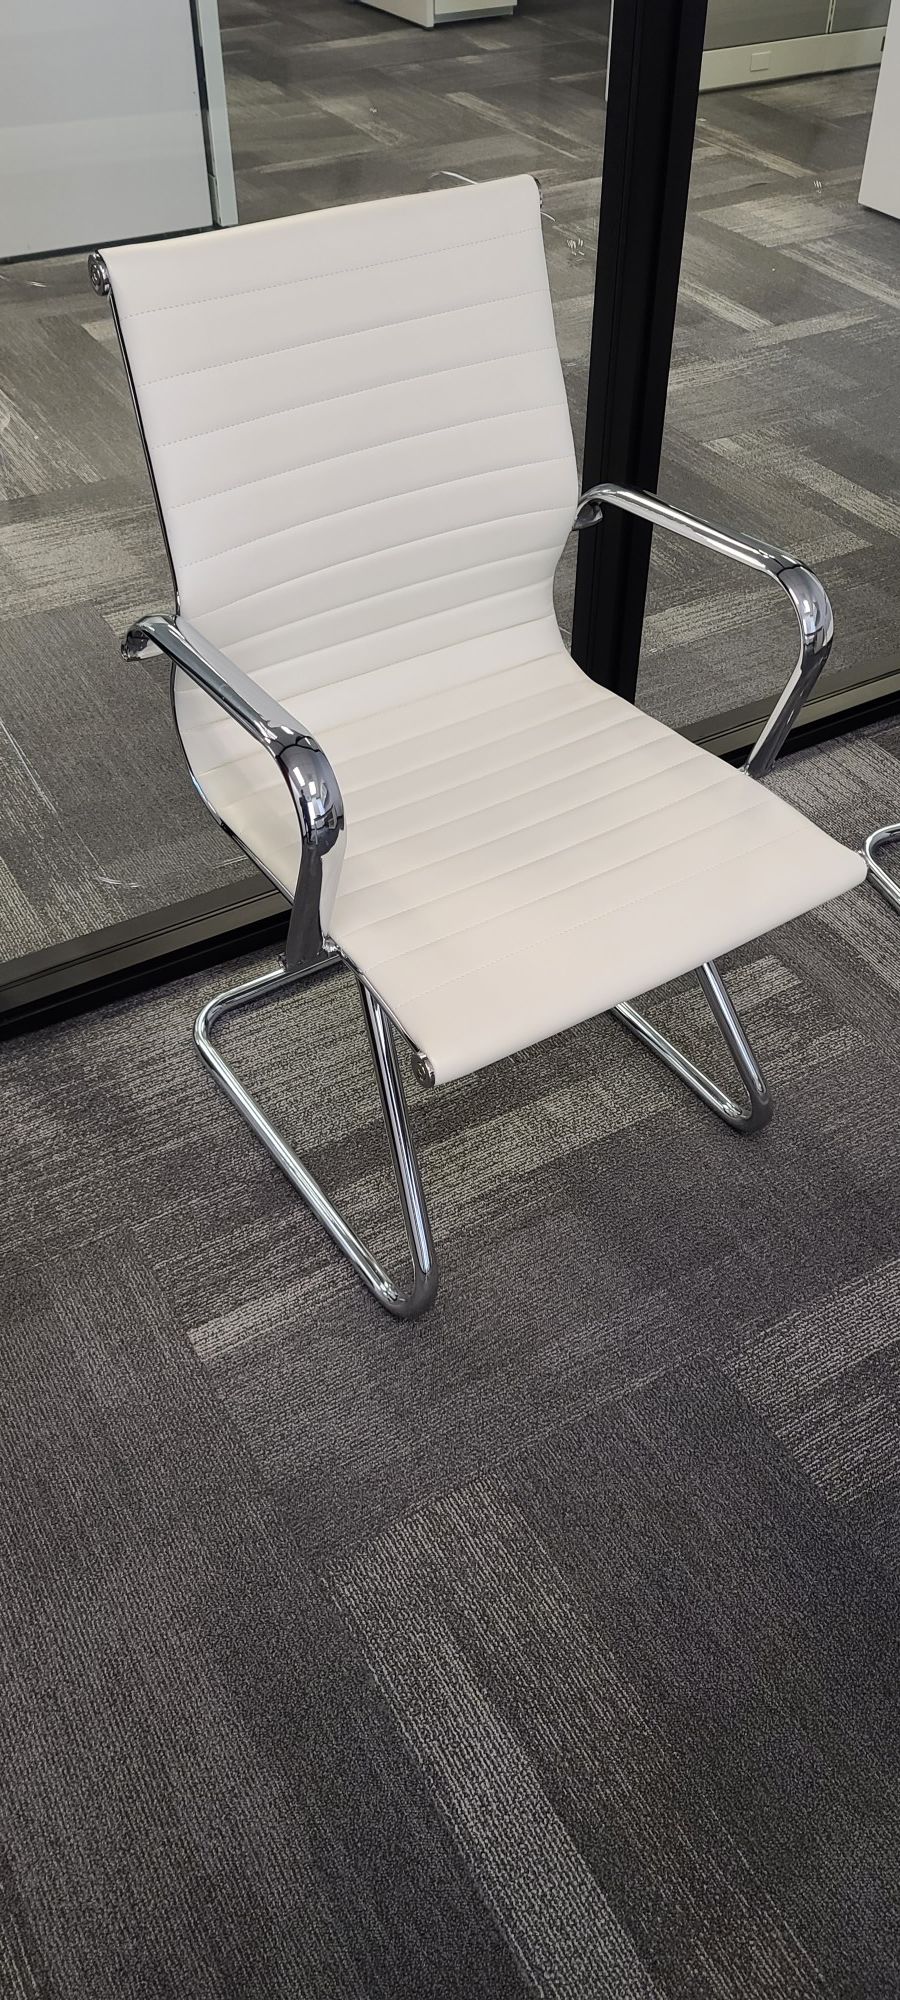 Leather Office or dining chair brand new.